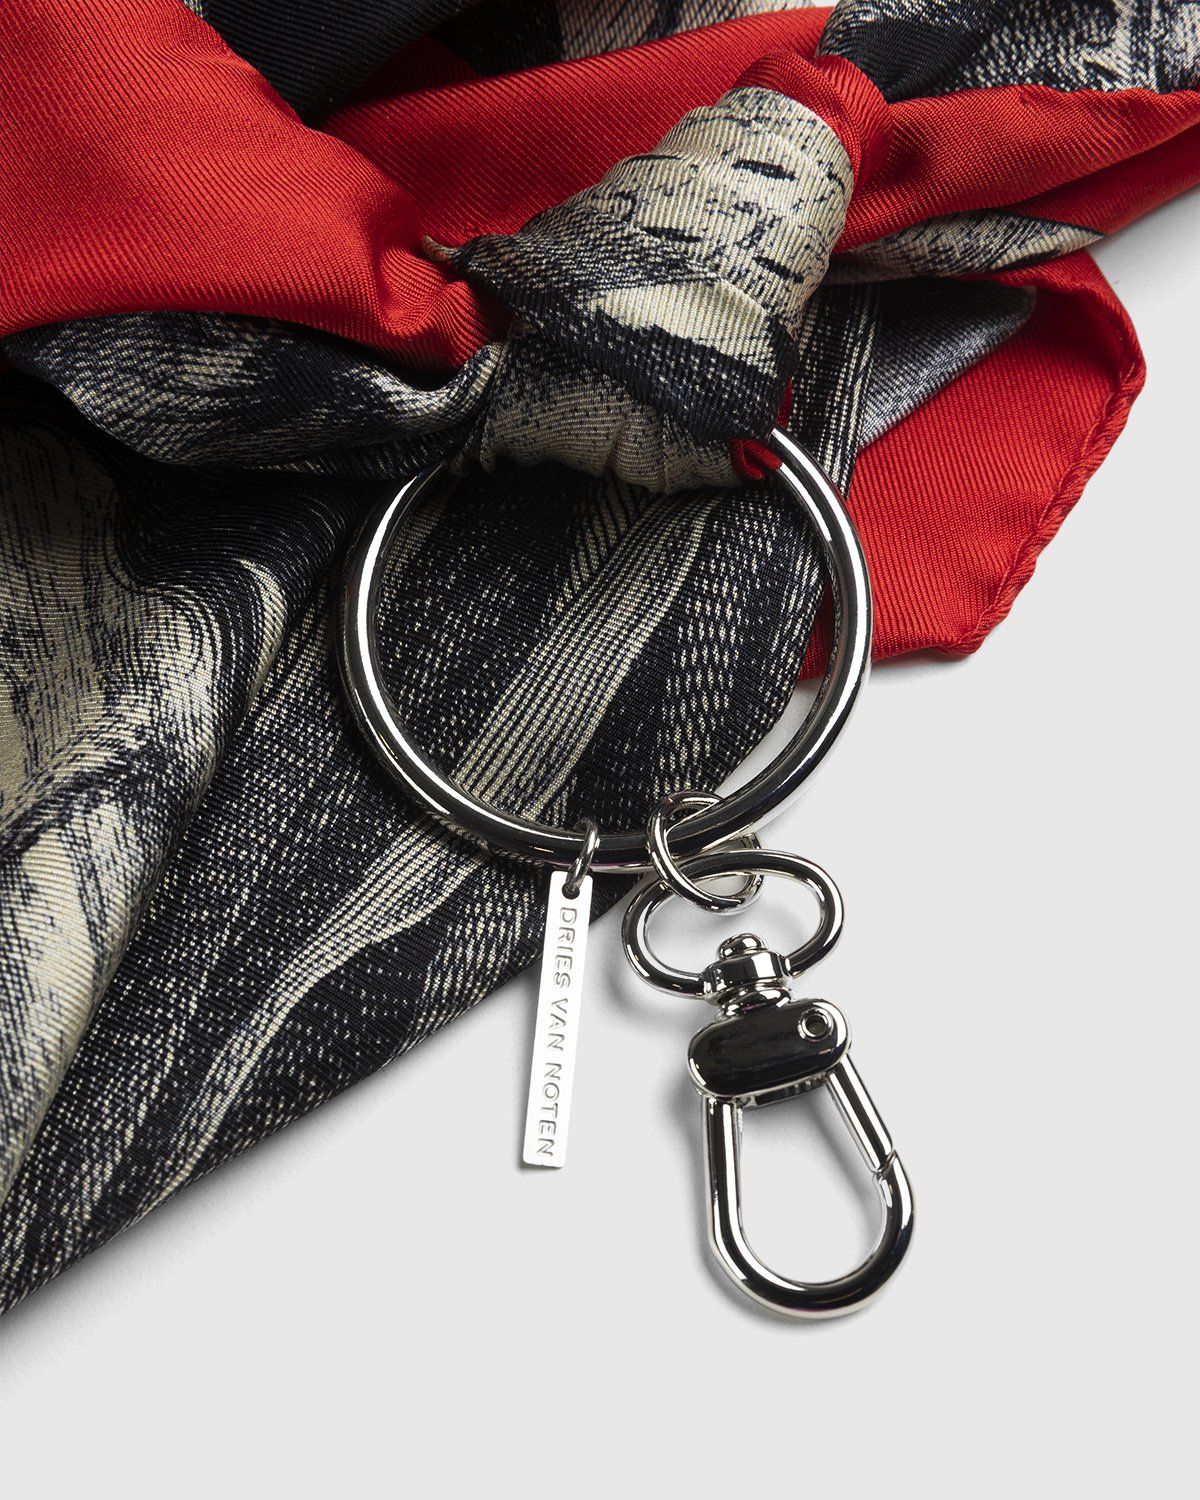 Dries Van Noten – Keychain With Scarf Red - Image 2